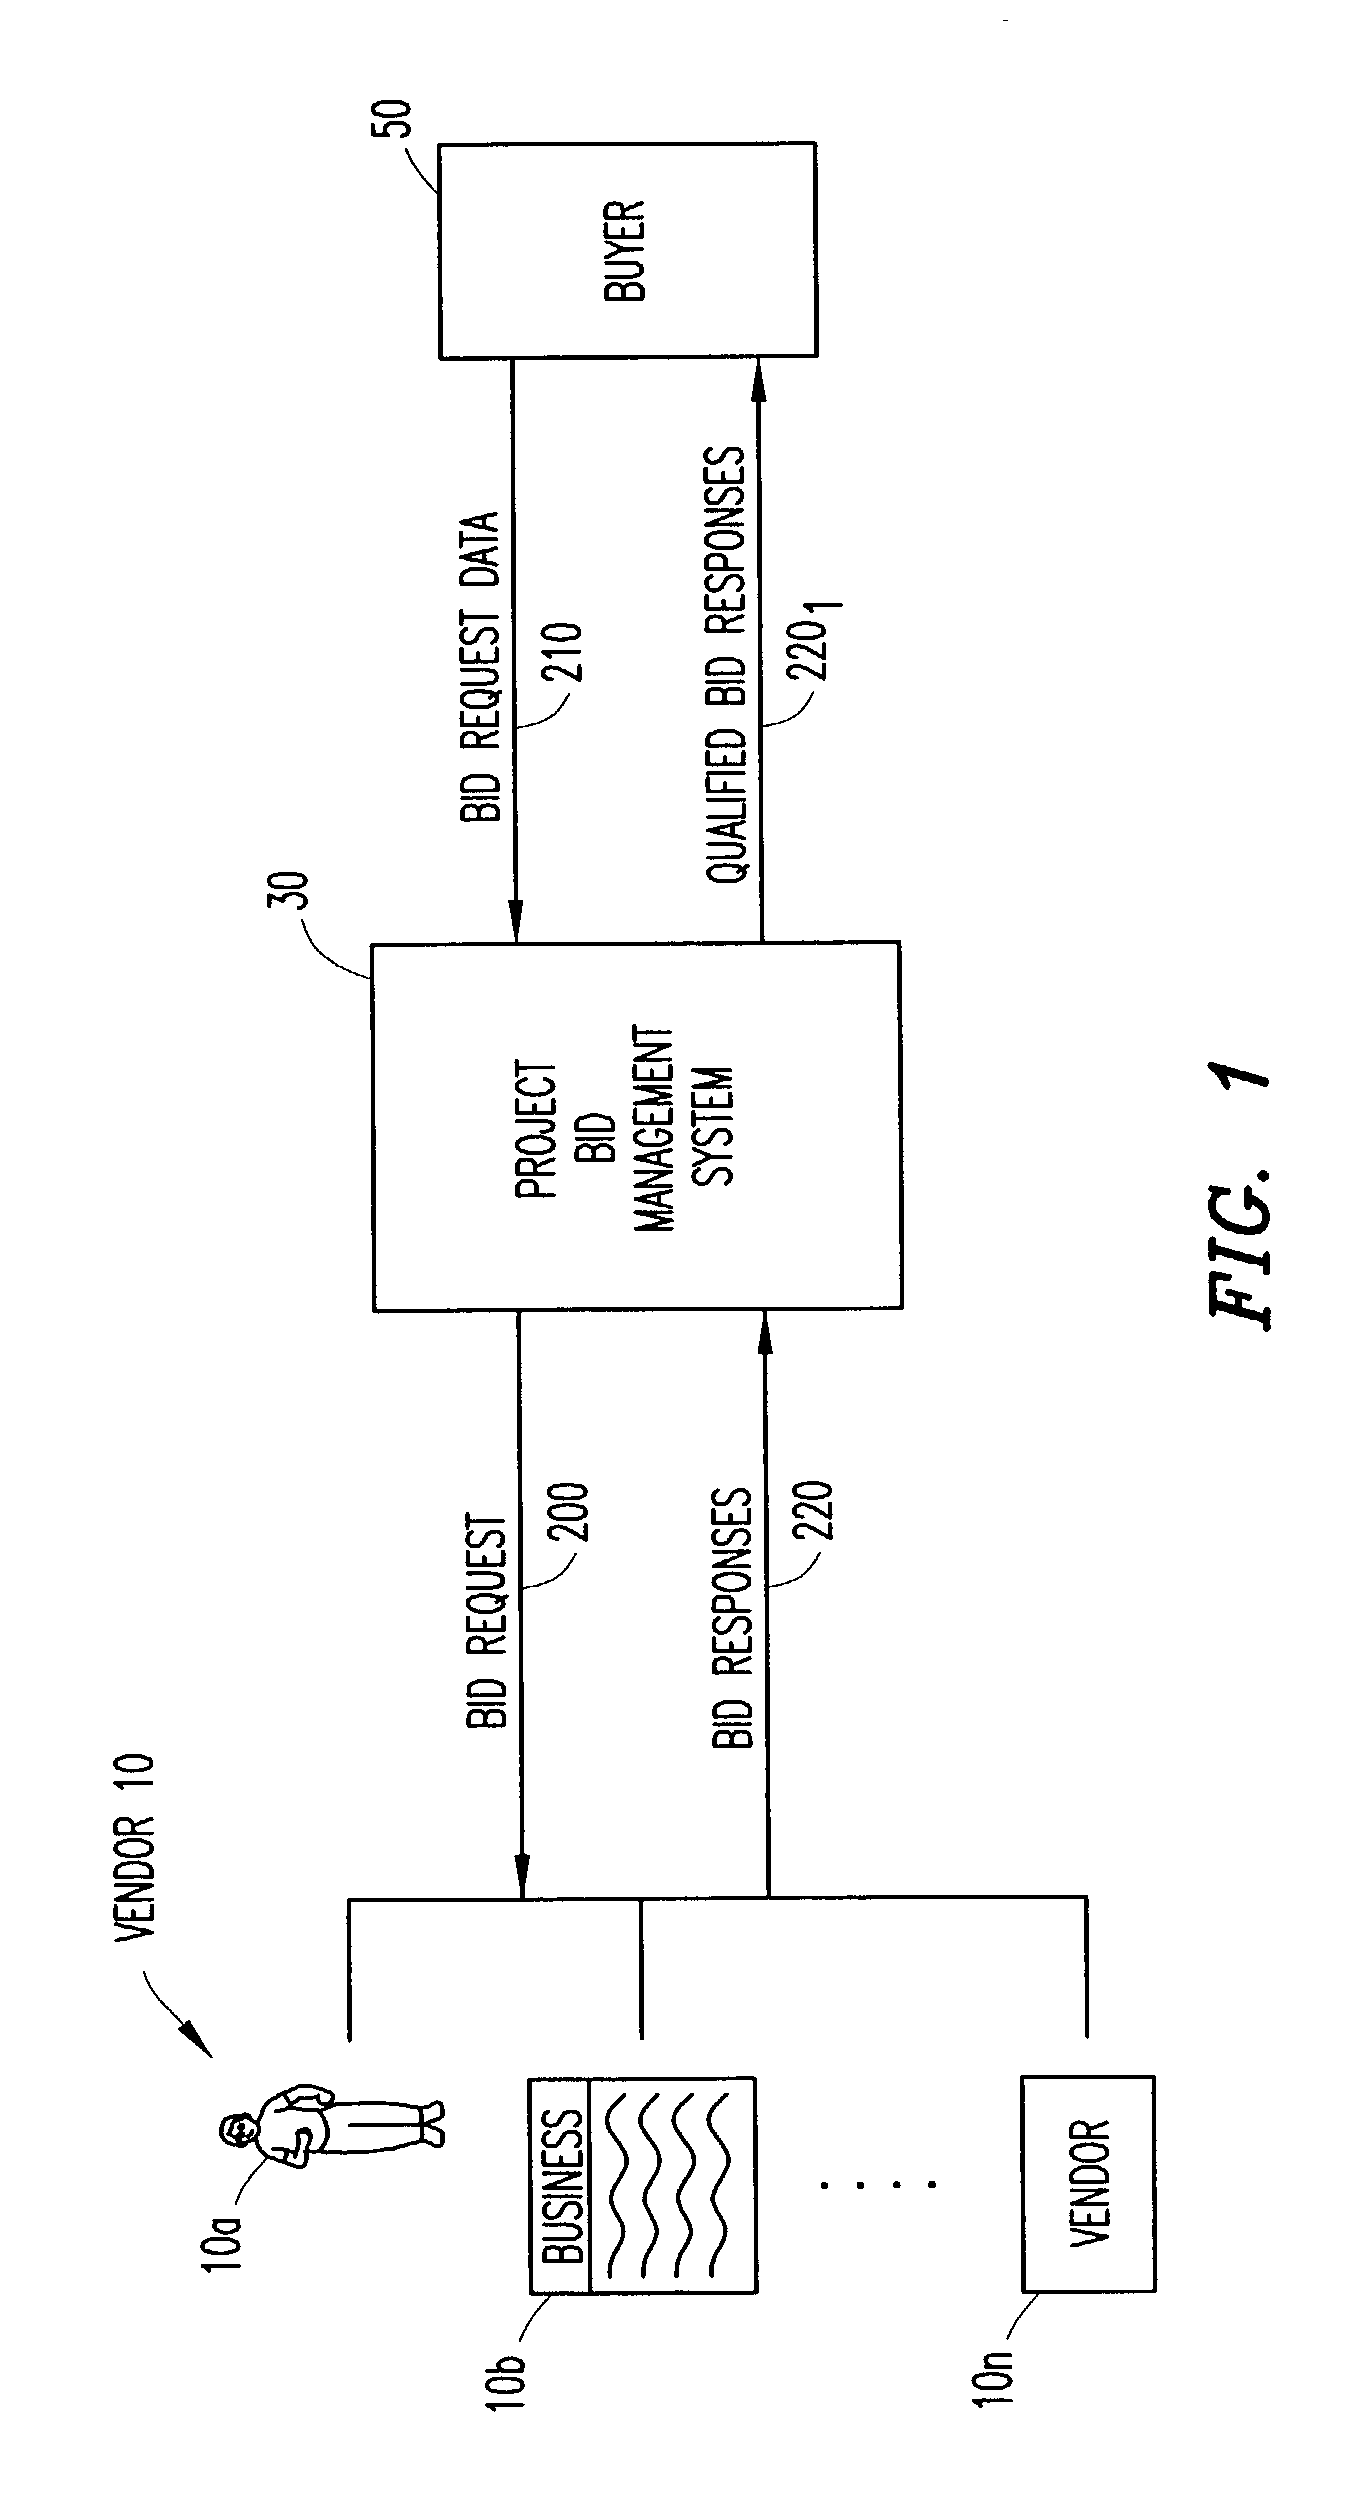 Computer system and method for facilitating and managing the project bid and requisition process